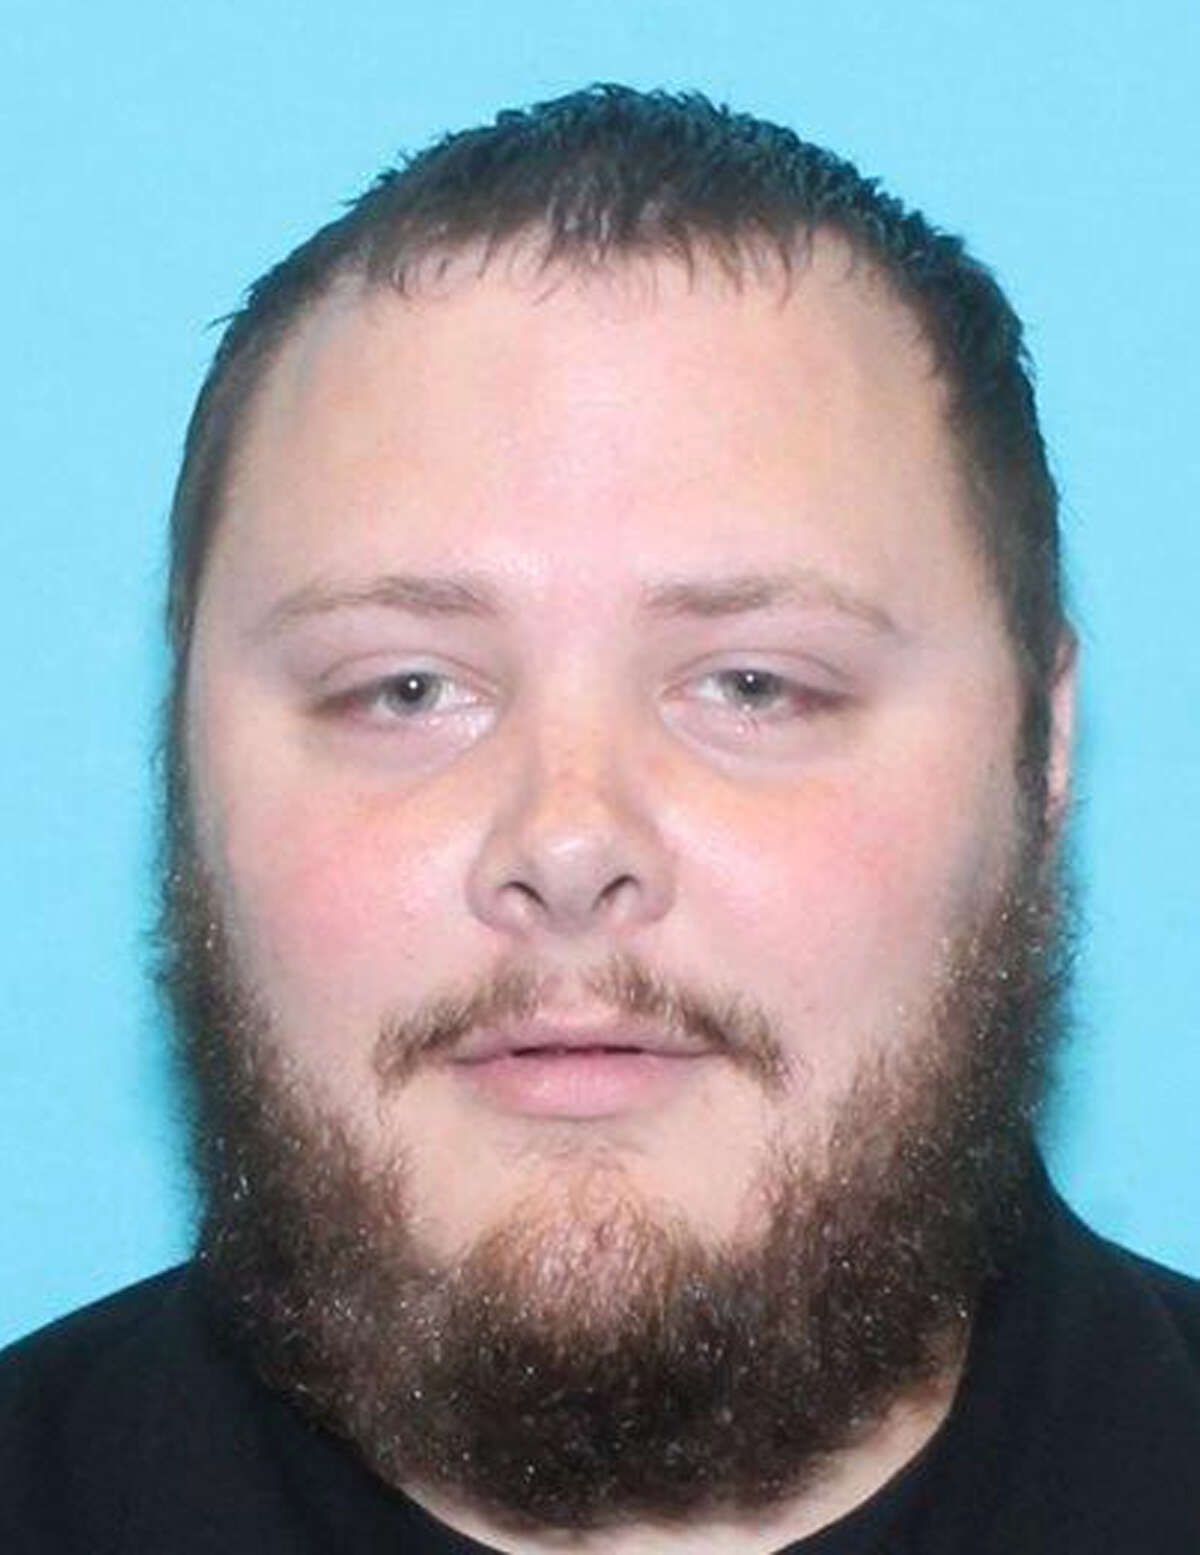 This undated photo provided by the Texas Department of Public Safety shows Devin Kelley, the suspect in the shooting at the First Baptist Church in Sutherland Springs, Texas, on Sunday, Nov. 5, 2017. A short time after the shooting, Kelley was found dead in his vehicle.